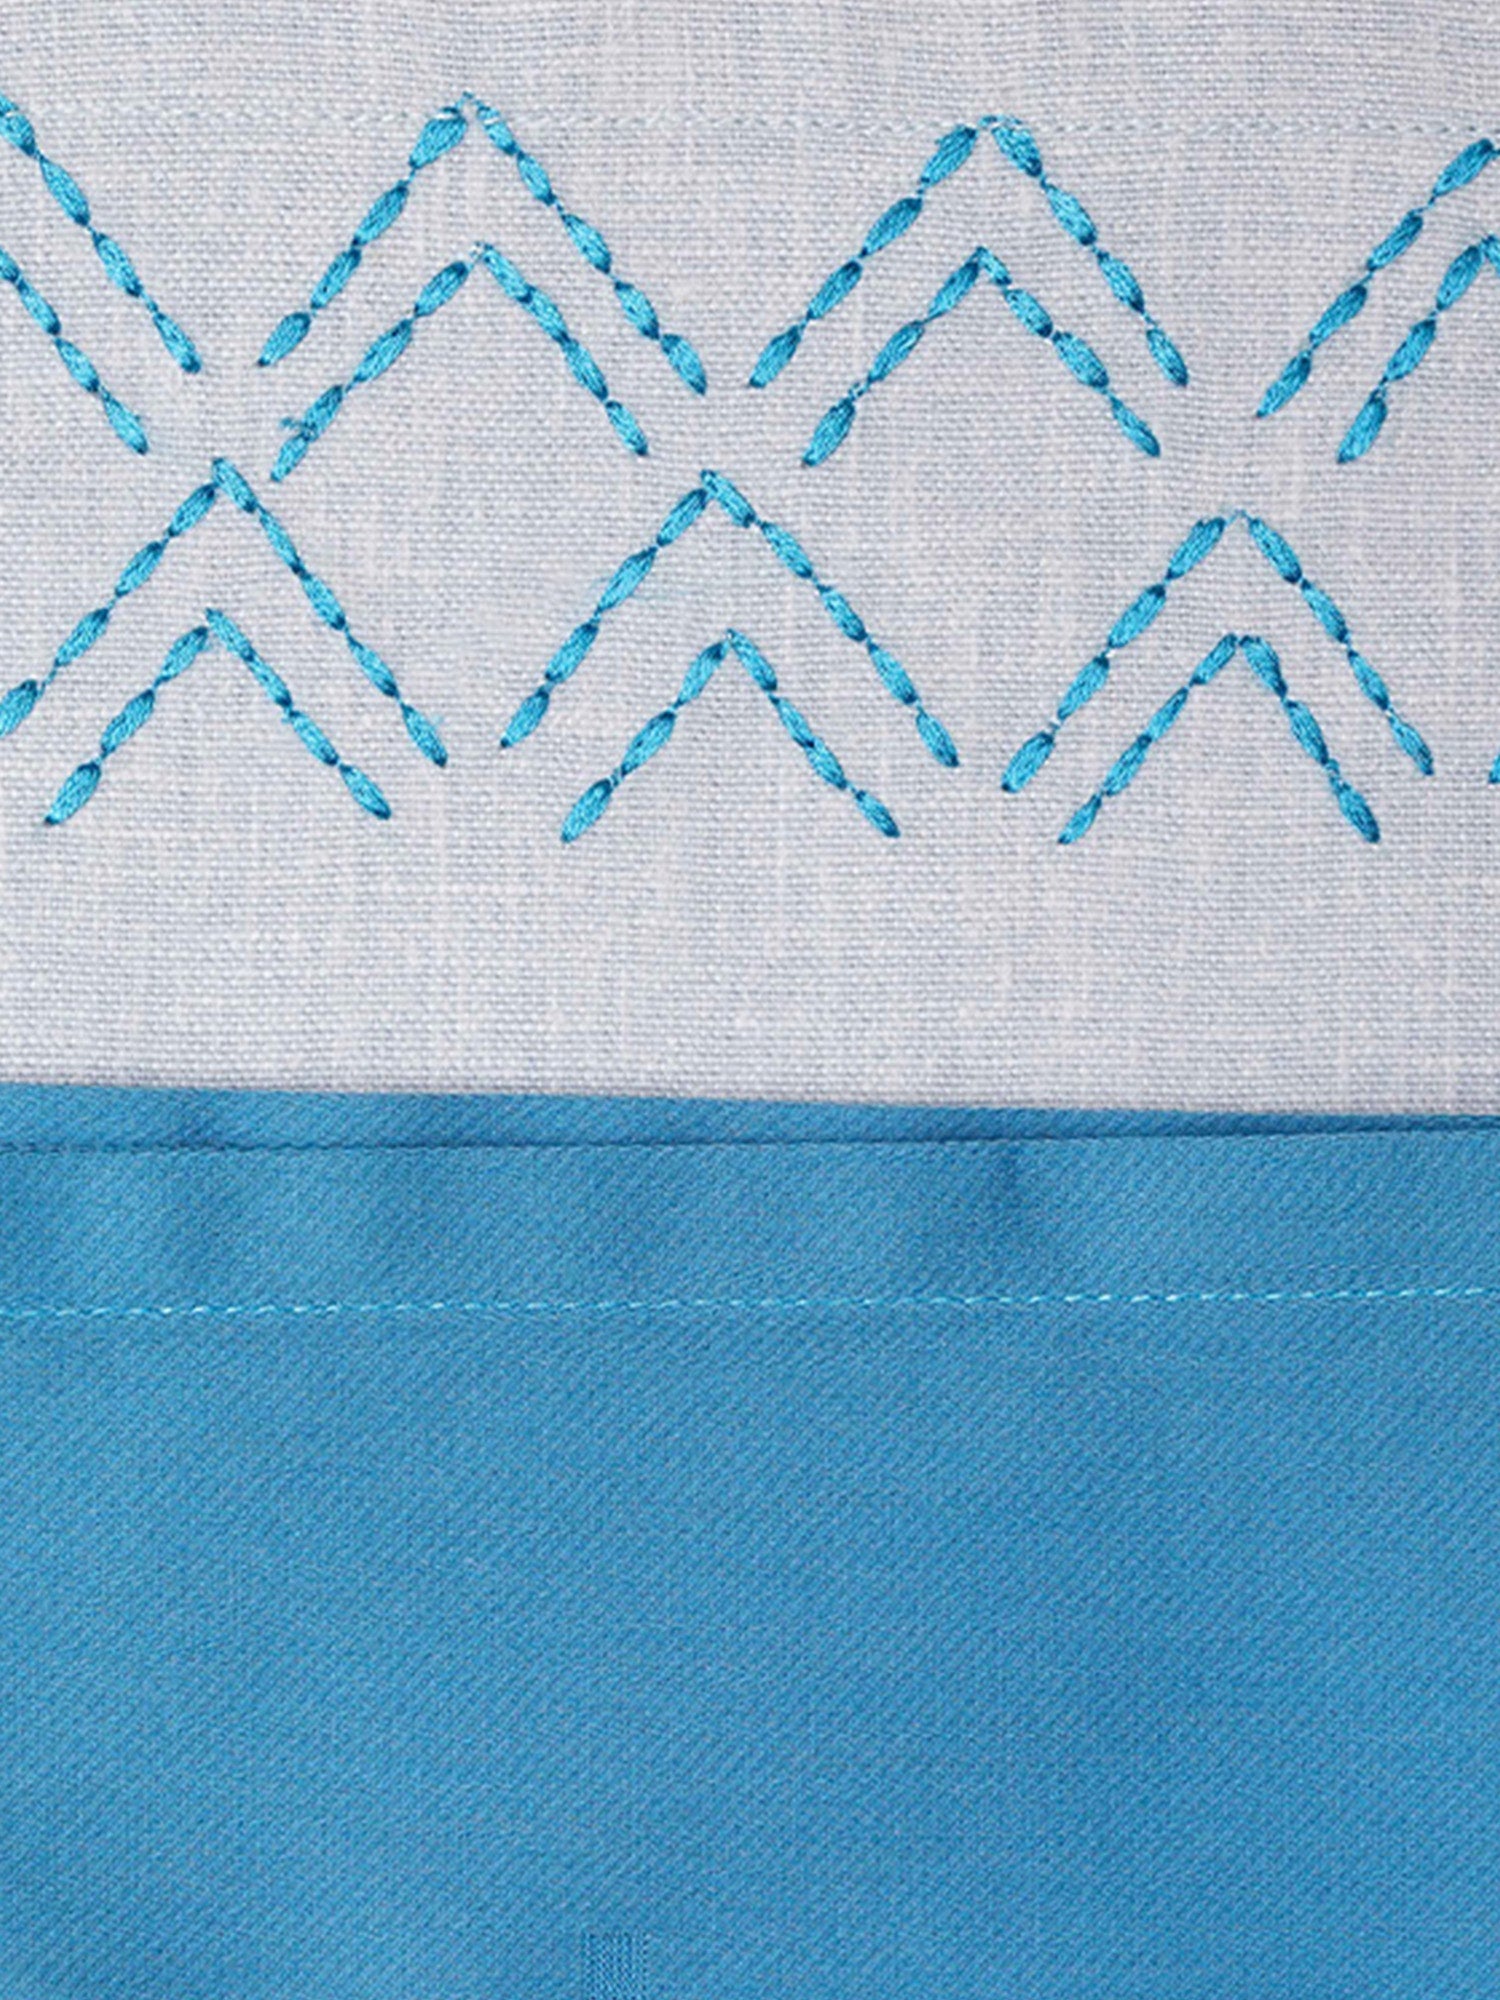 closeup of hand embroidered dinner table placemats and napkins in blue shades - 13x19 inch 